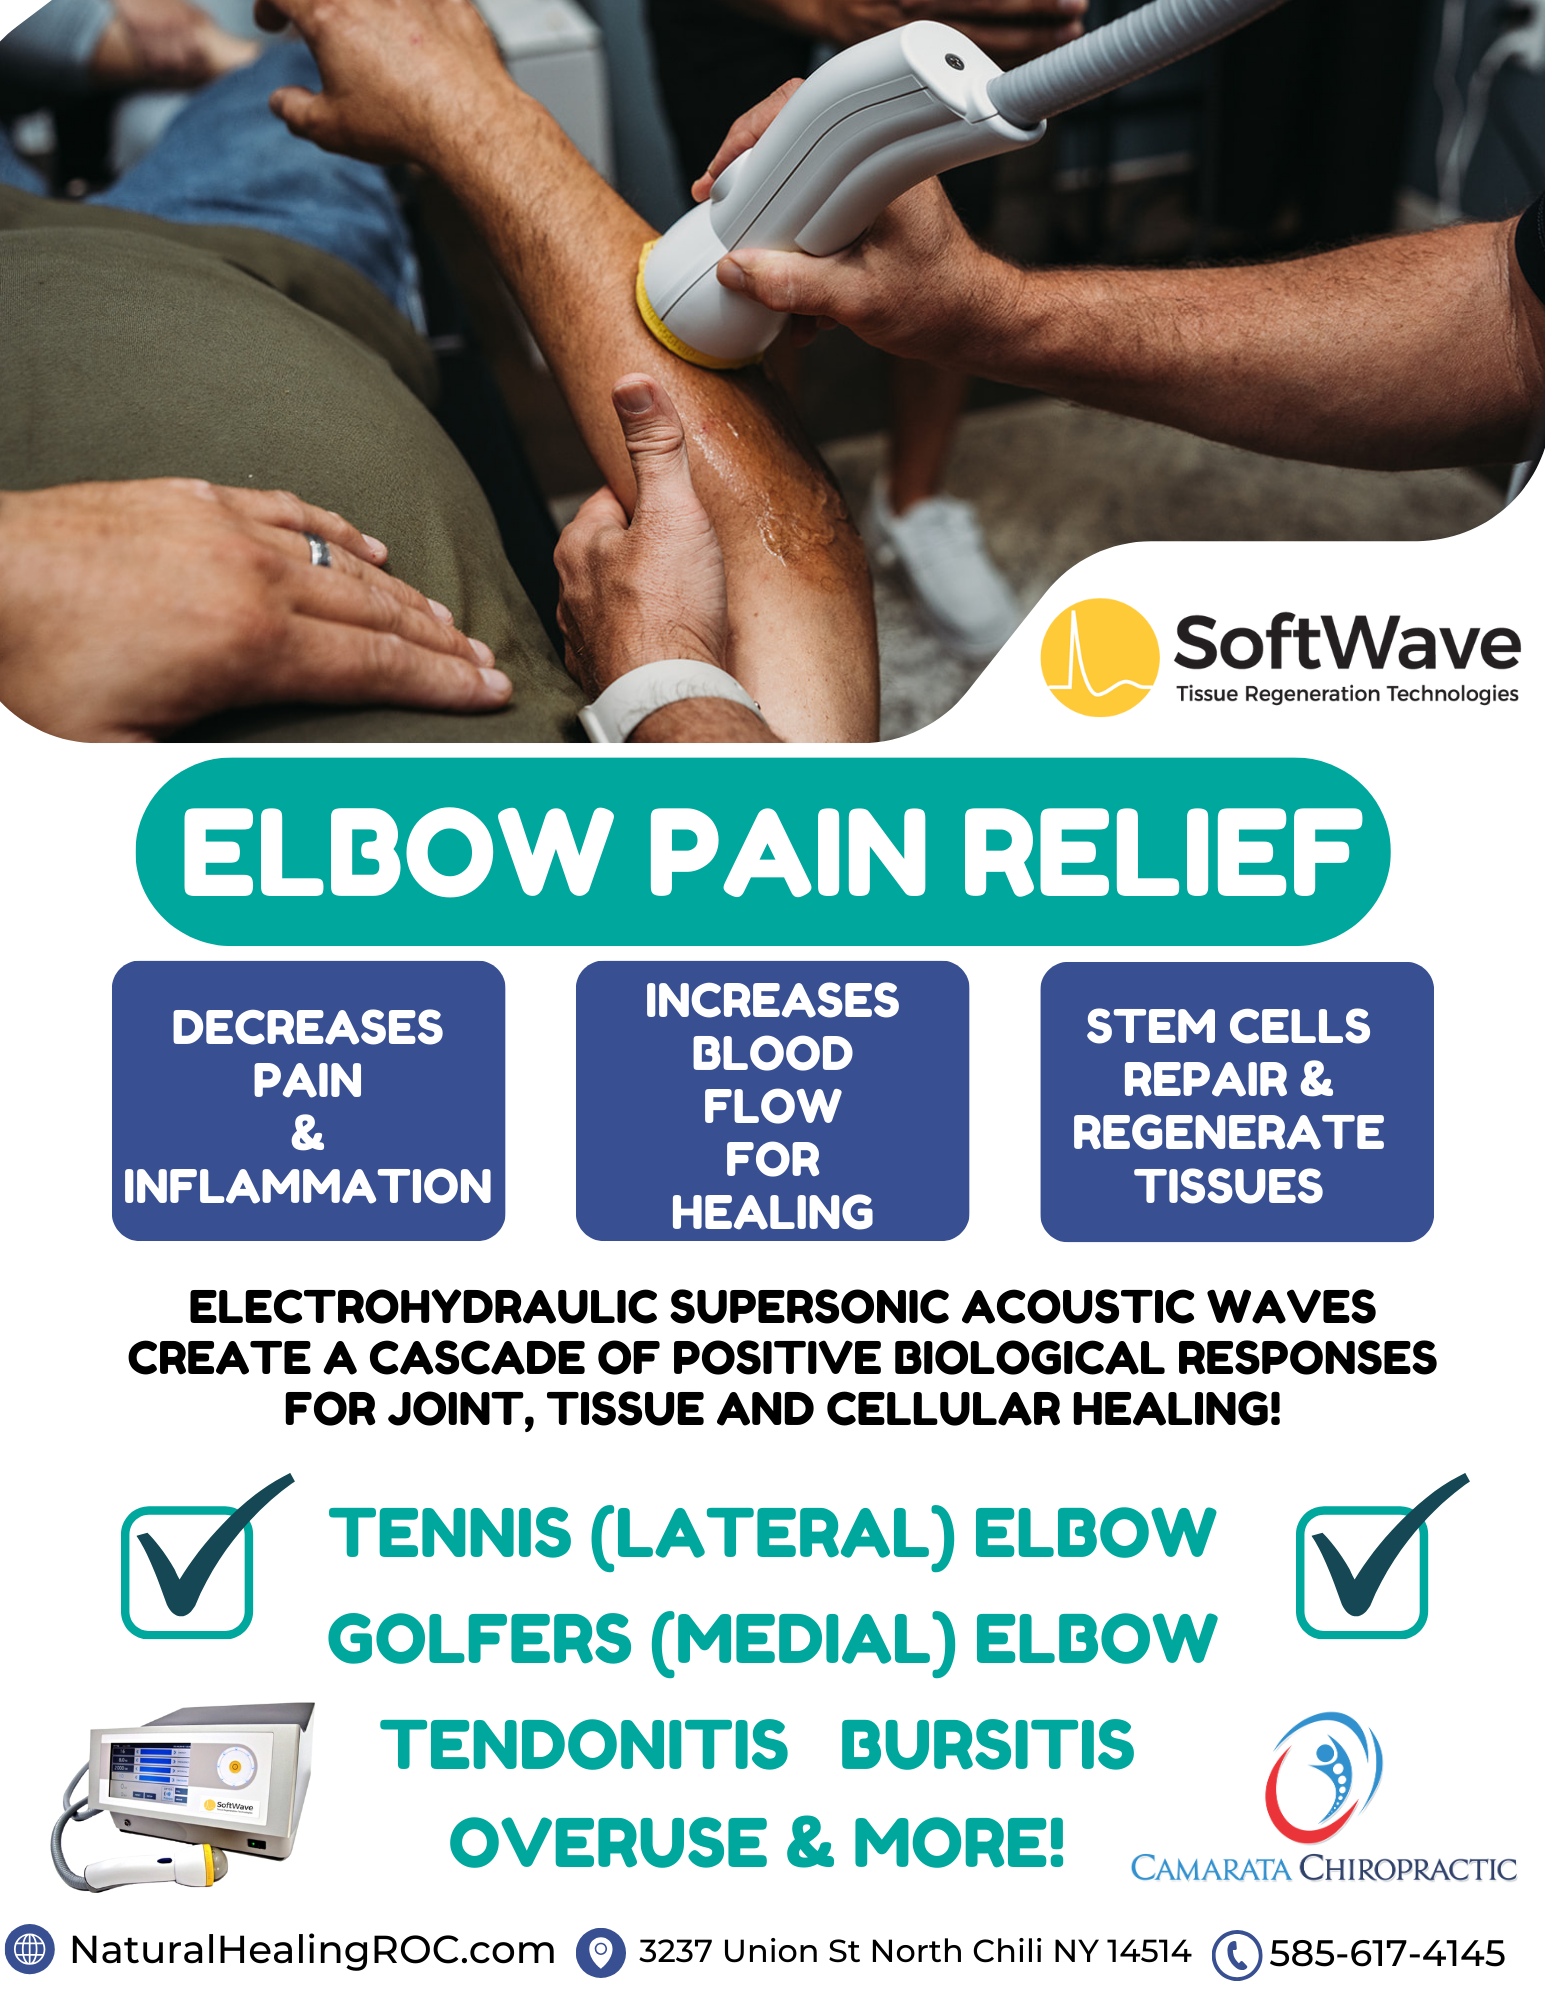 Embracing Recovery: SoftWave TRT's Breakthrough in Elbow Pain Relief at Camarata Chiropractic